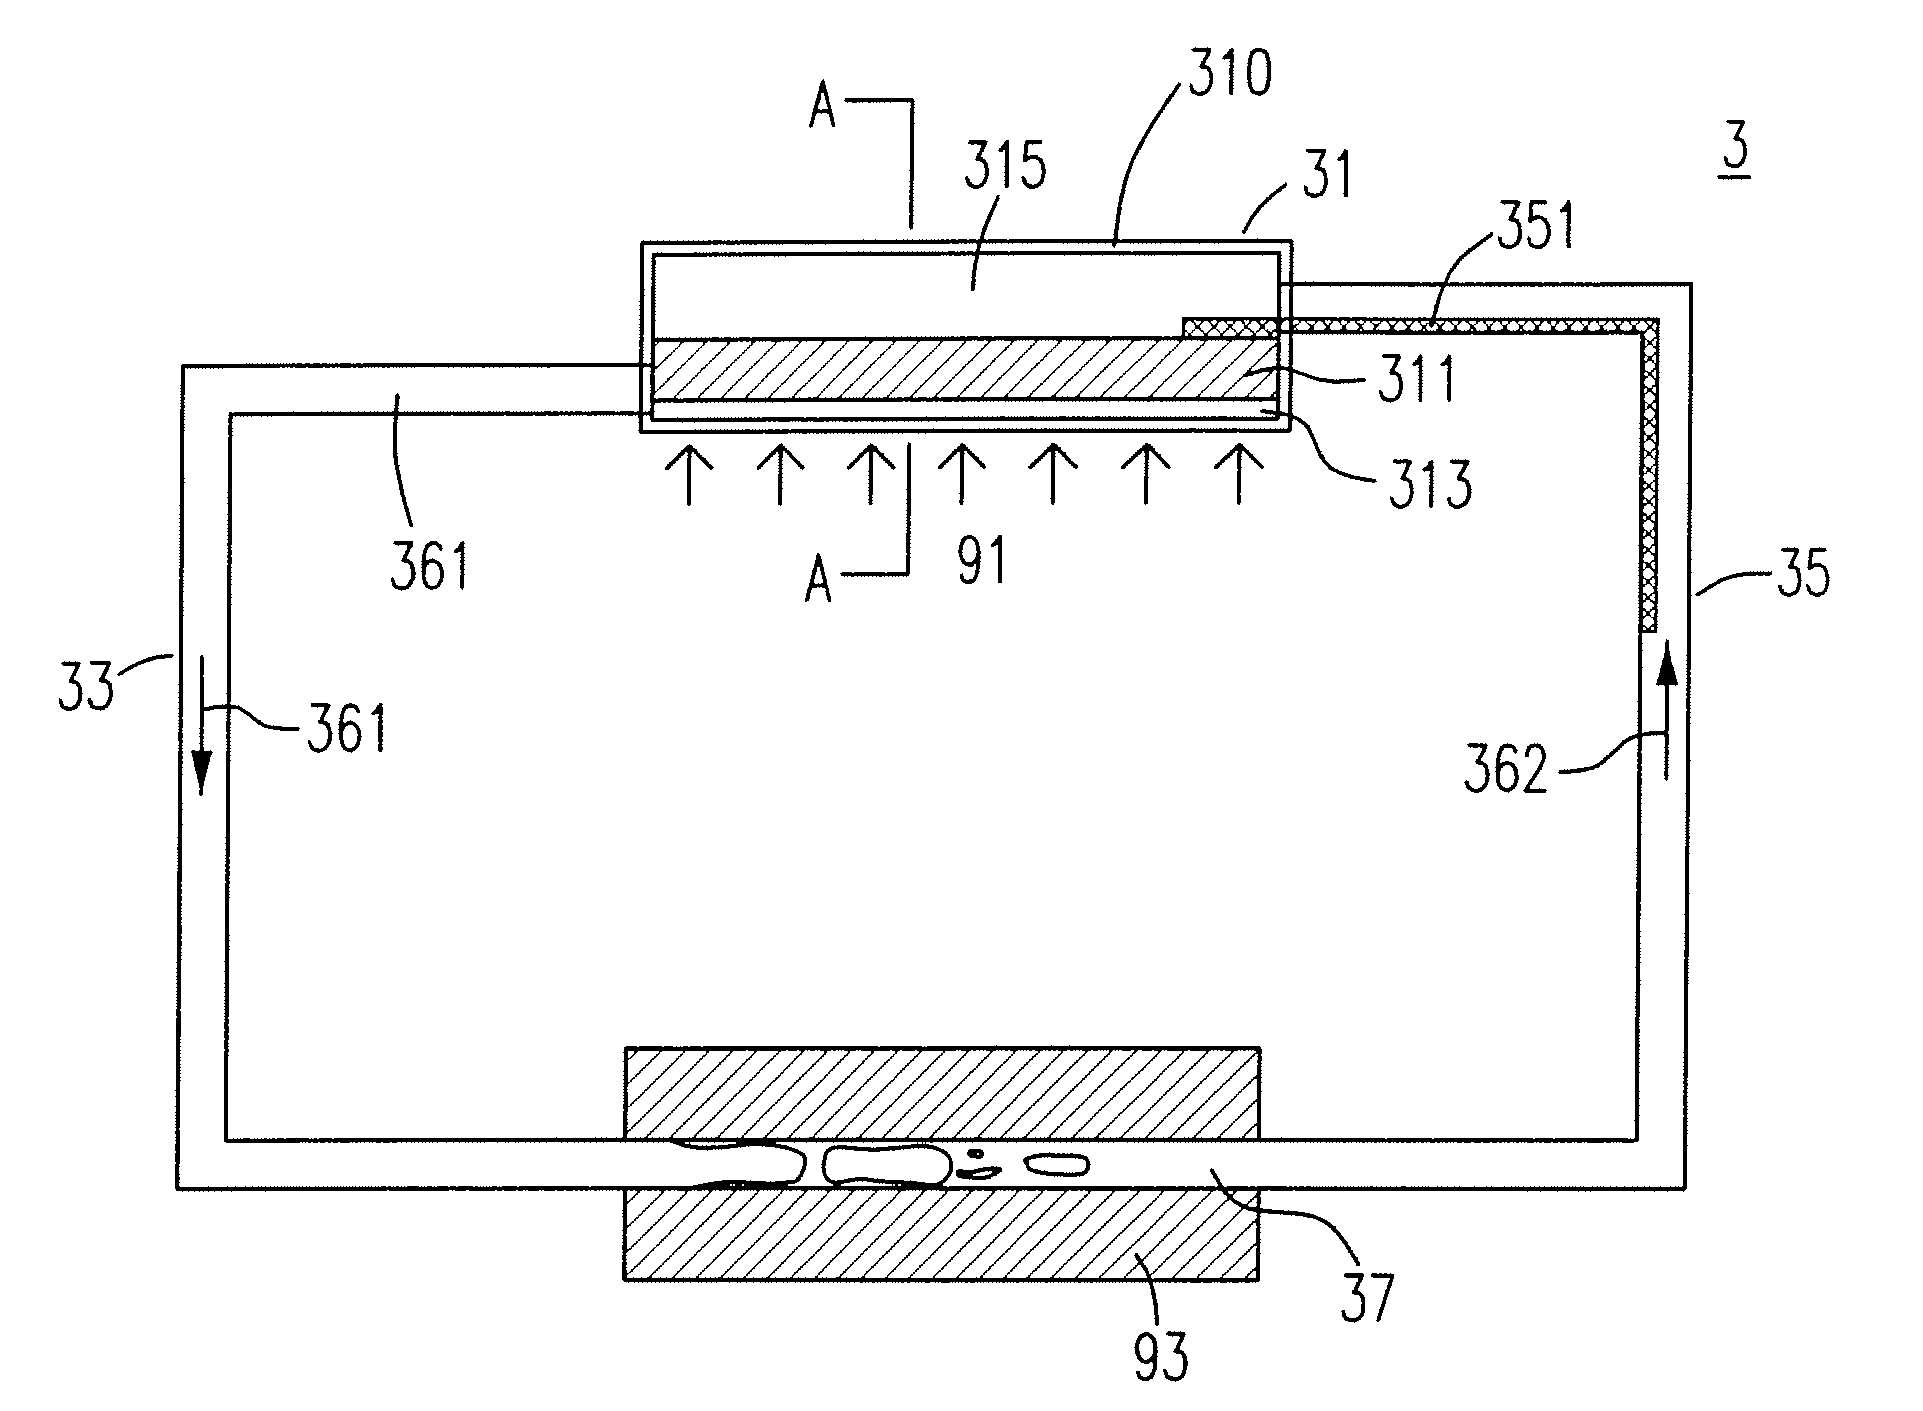 Heat Dissipation System With A Plate Evaporator